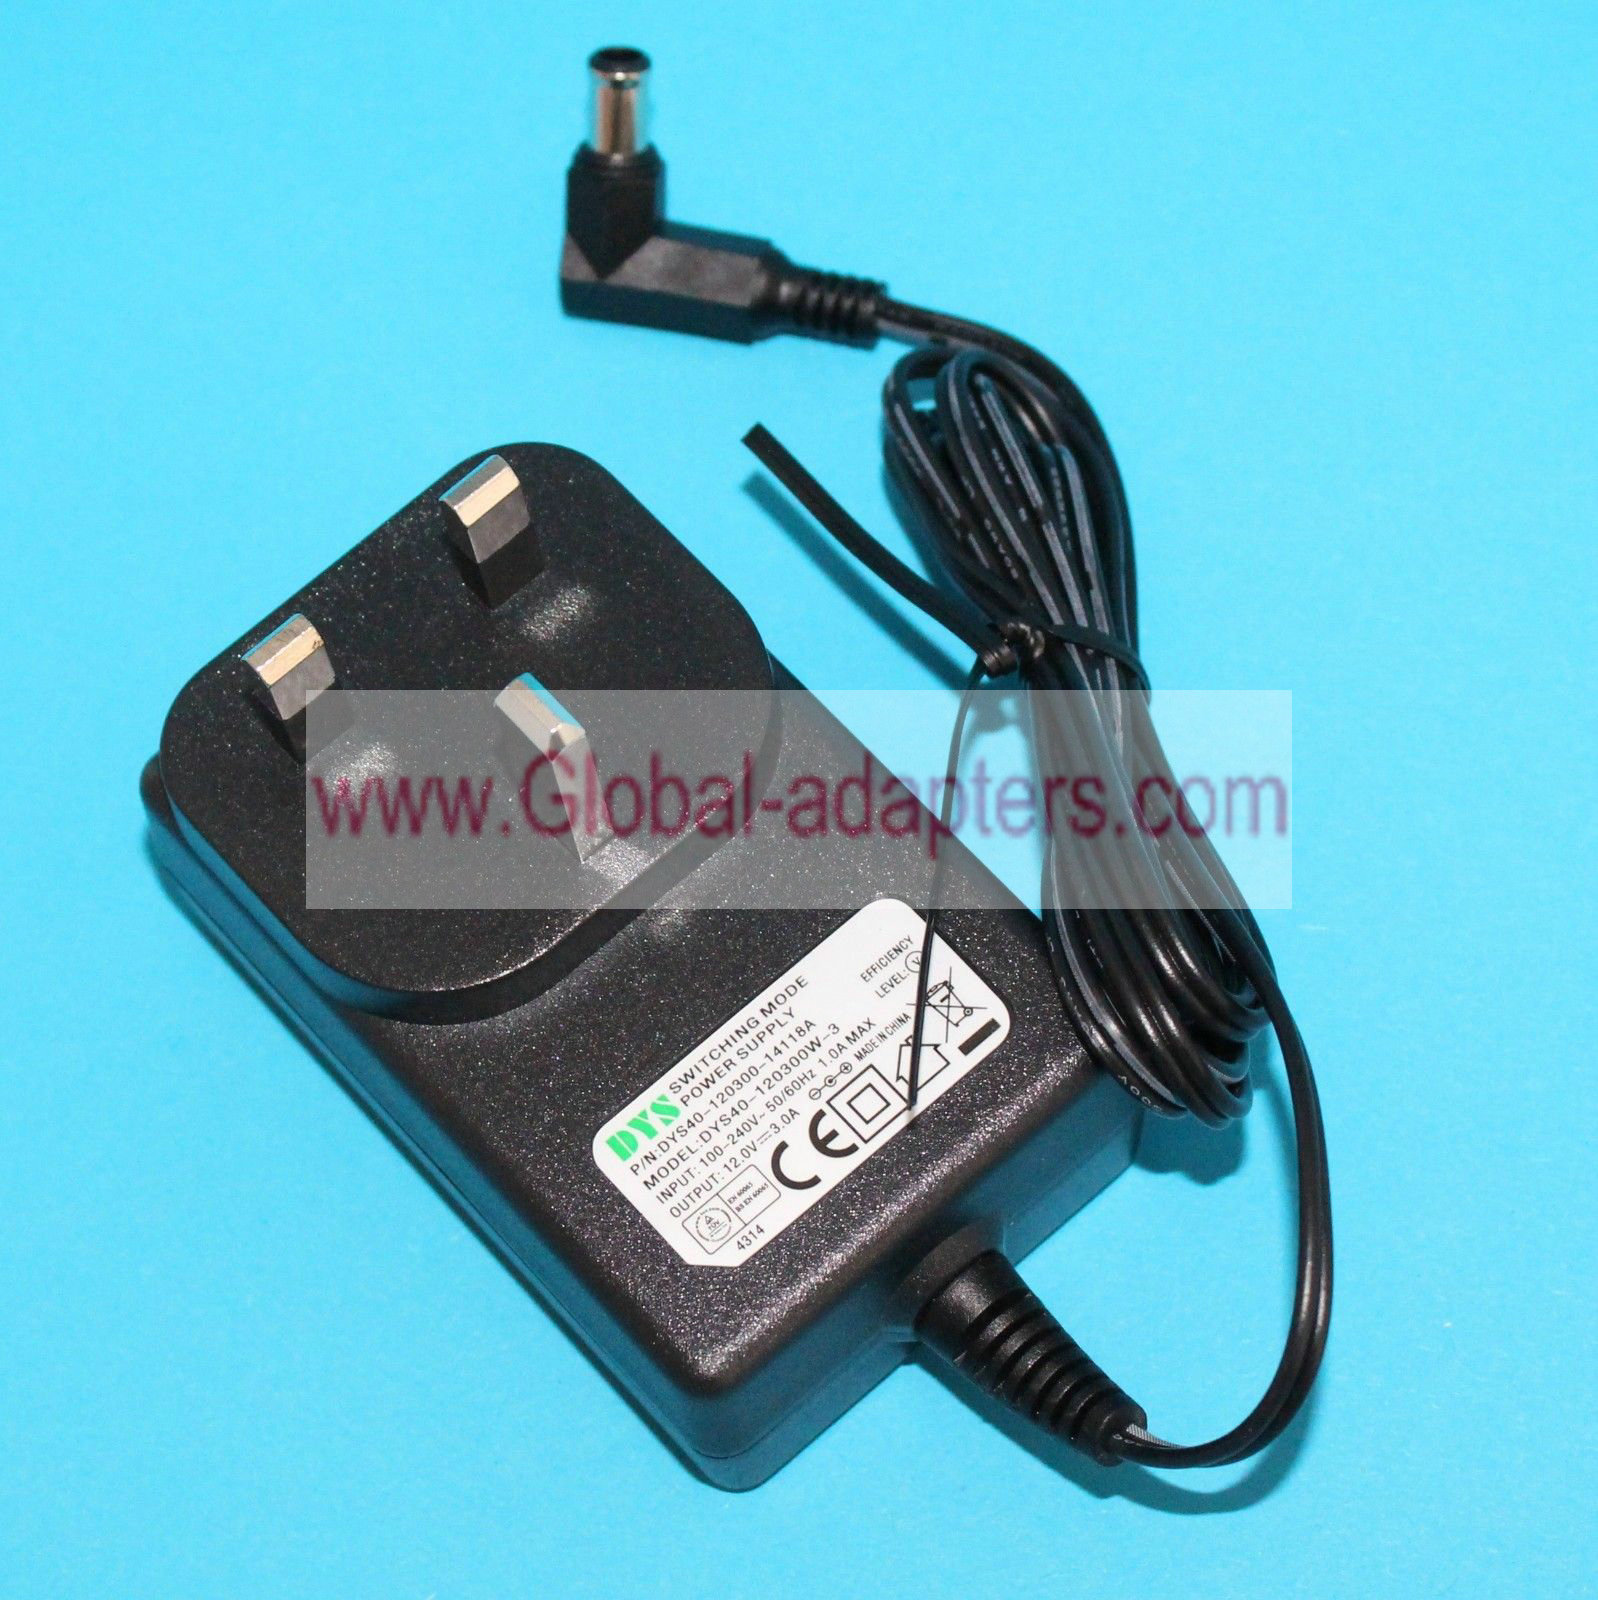 New DYS DYS40-120300W-3 Switching Mode Power Supply 12V 3.0A DYS40-120300-14118A AC ADAPTER